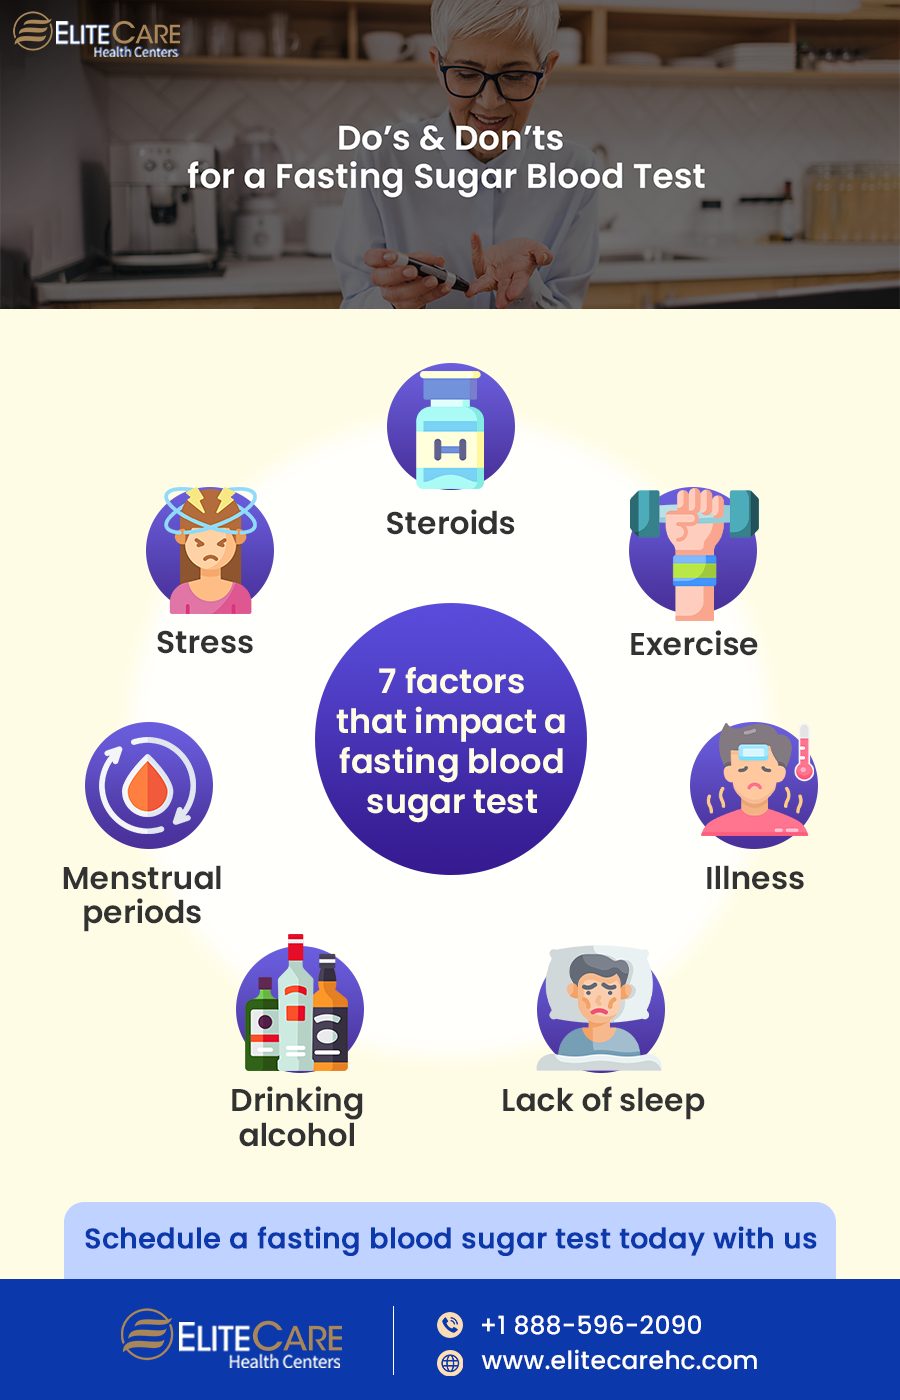 Do’s & Don’ts for a Fasting Sugar Blood Test | Infographic